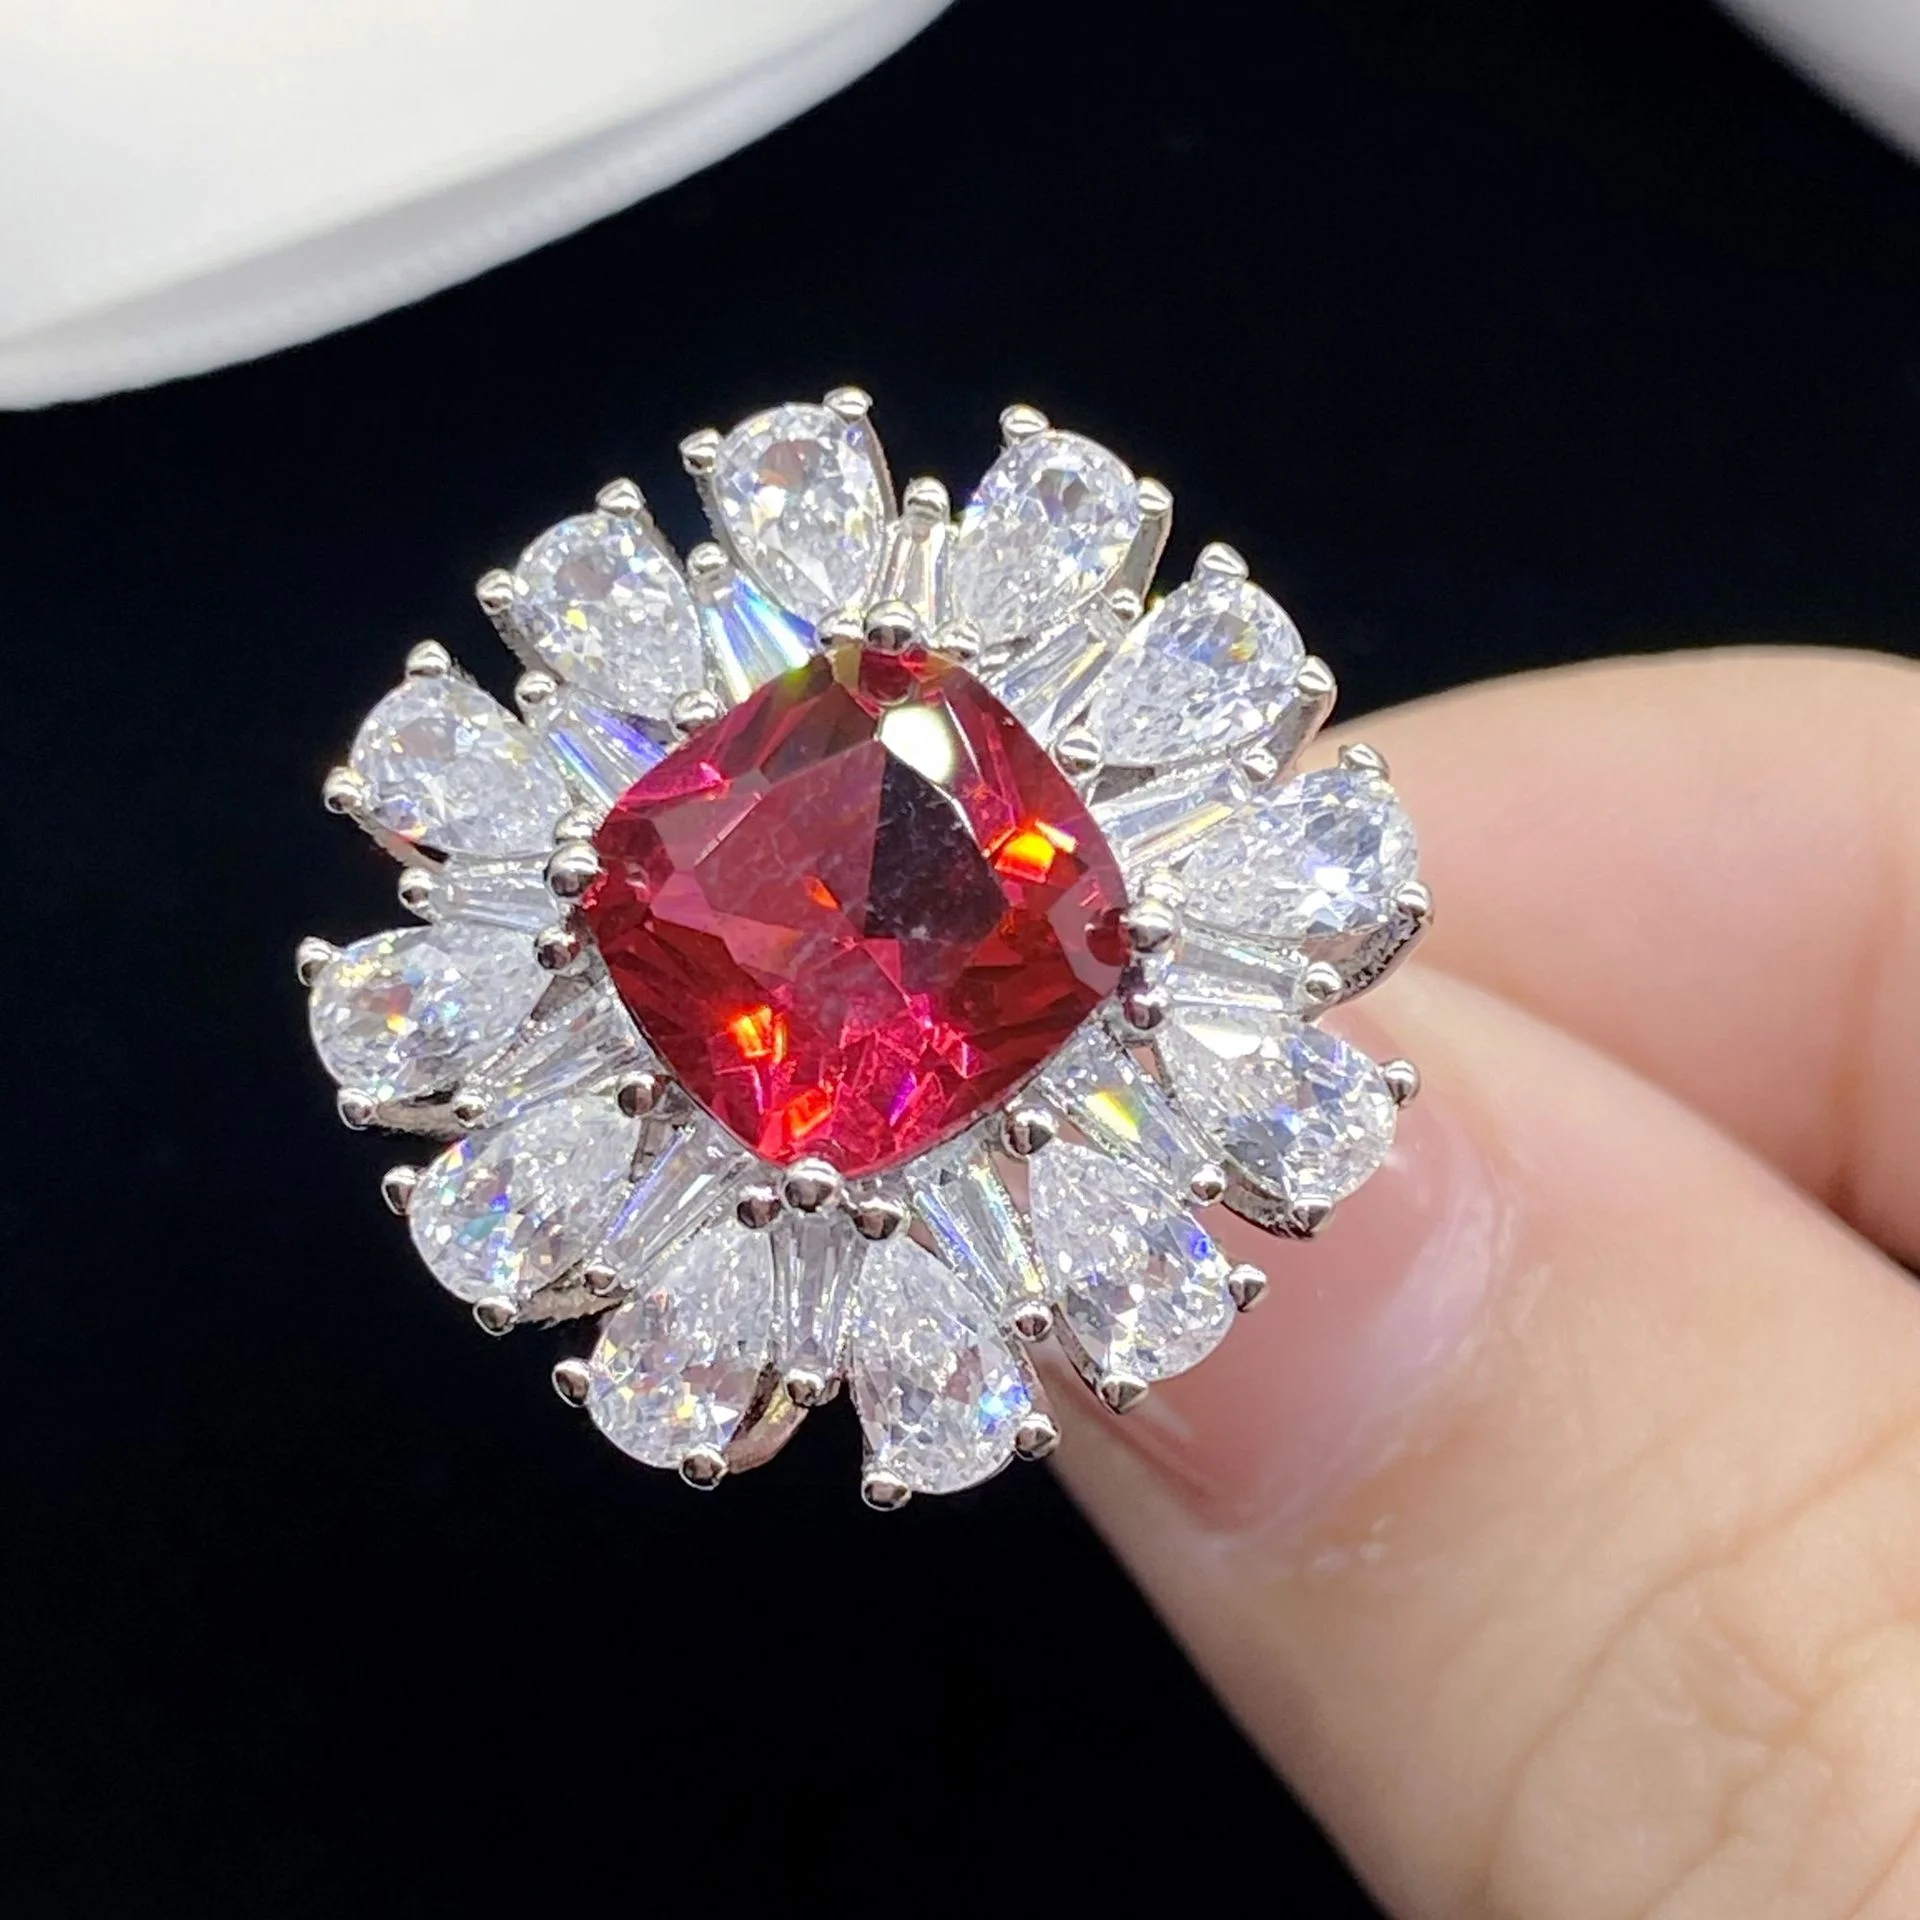 

Elegant High-end Group Inlaid Zircon Adjustable Ring Simulation Red Tourmaline Color Treasure For Women Super Shiny Jewelry, Picture shows